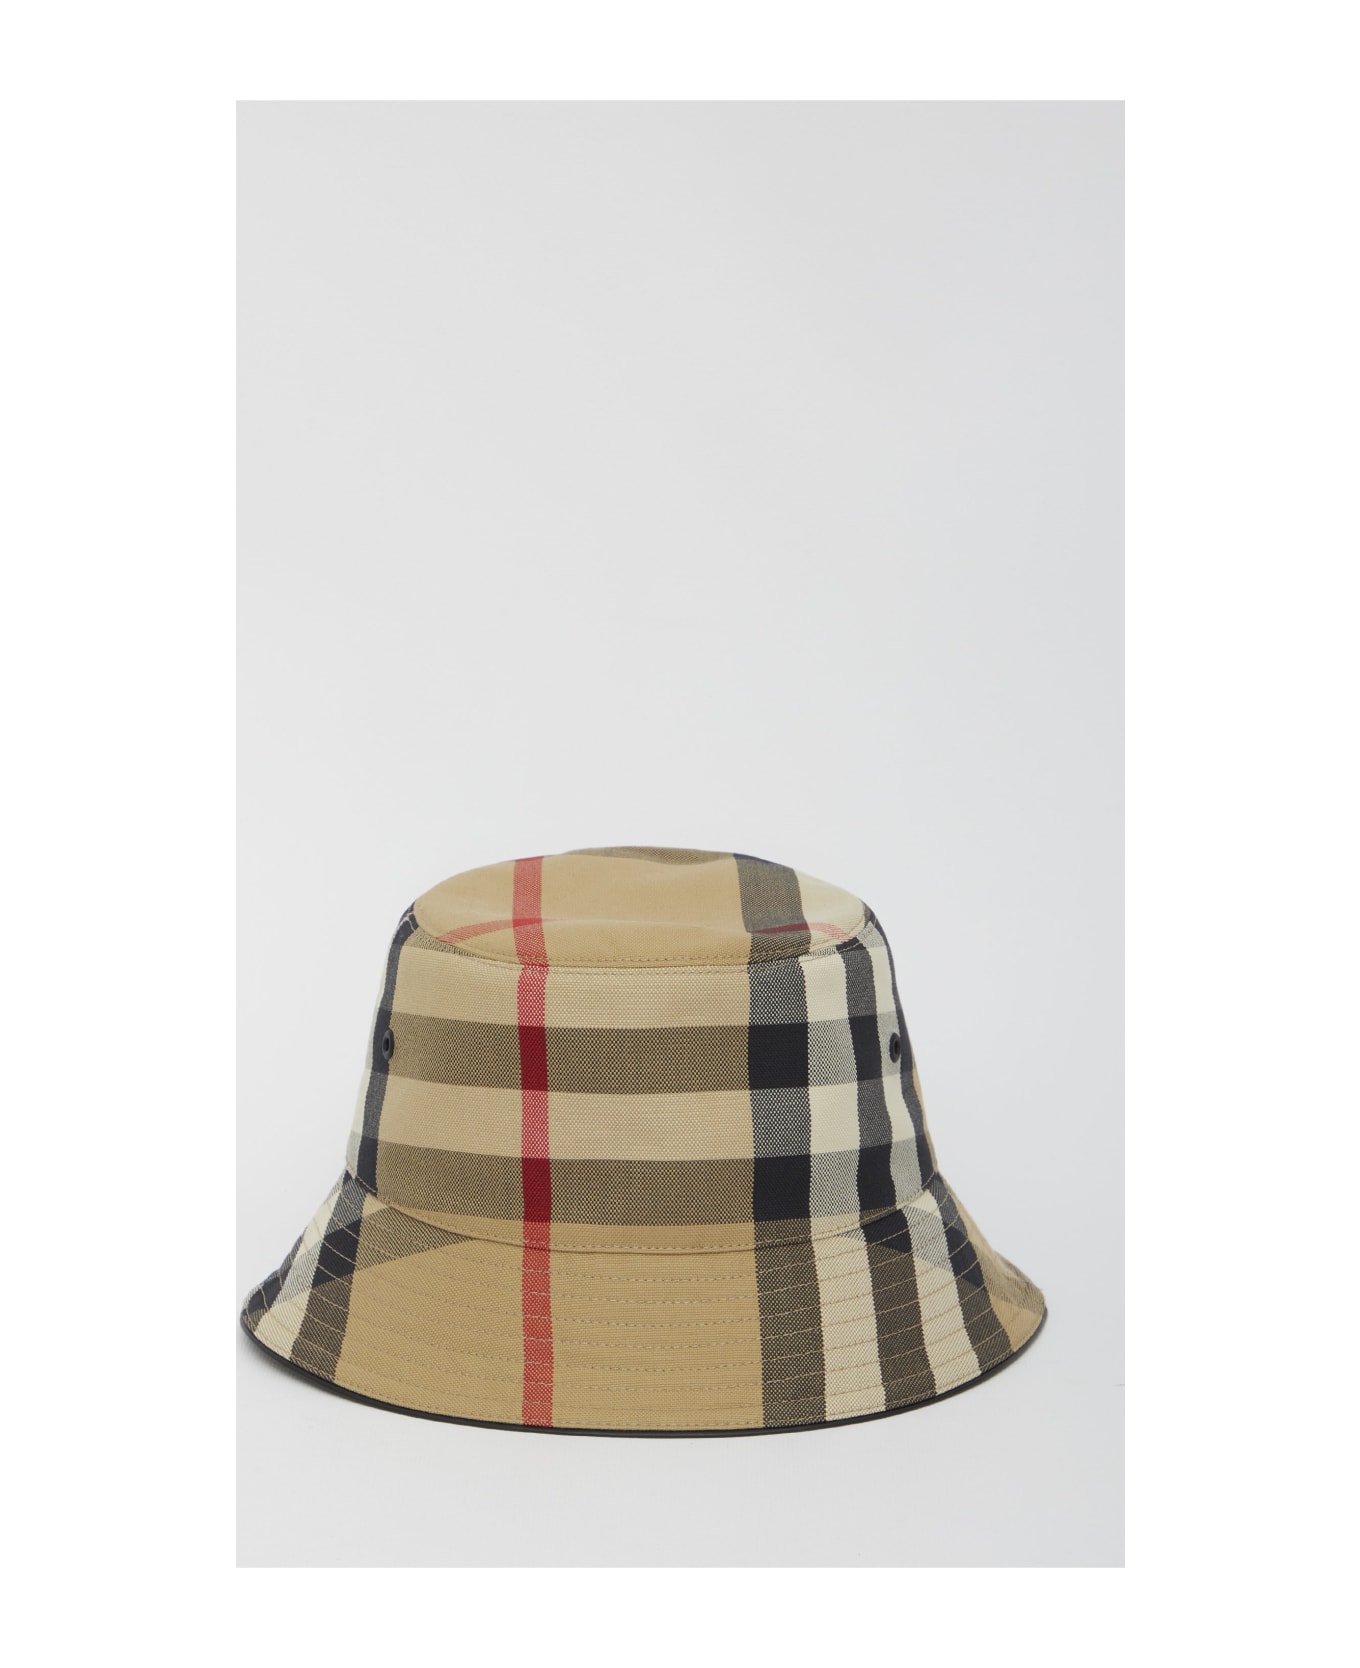 Burberry Exaggerated Check Bucket Hat - BEIGE 帽子